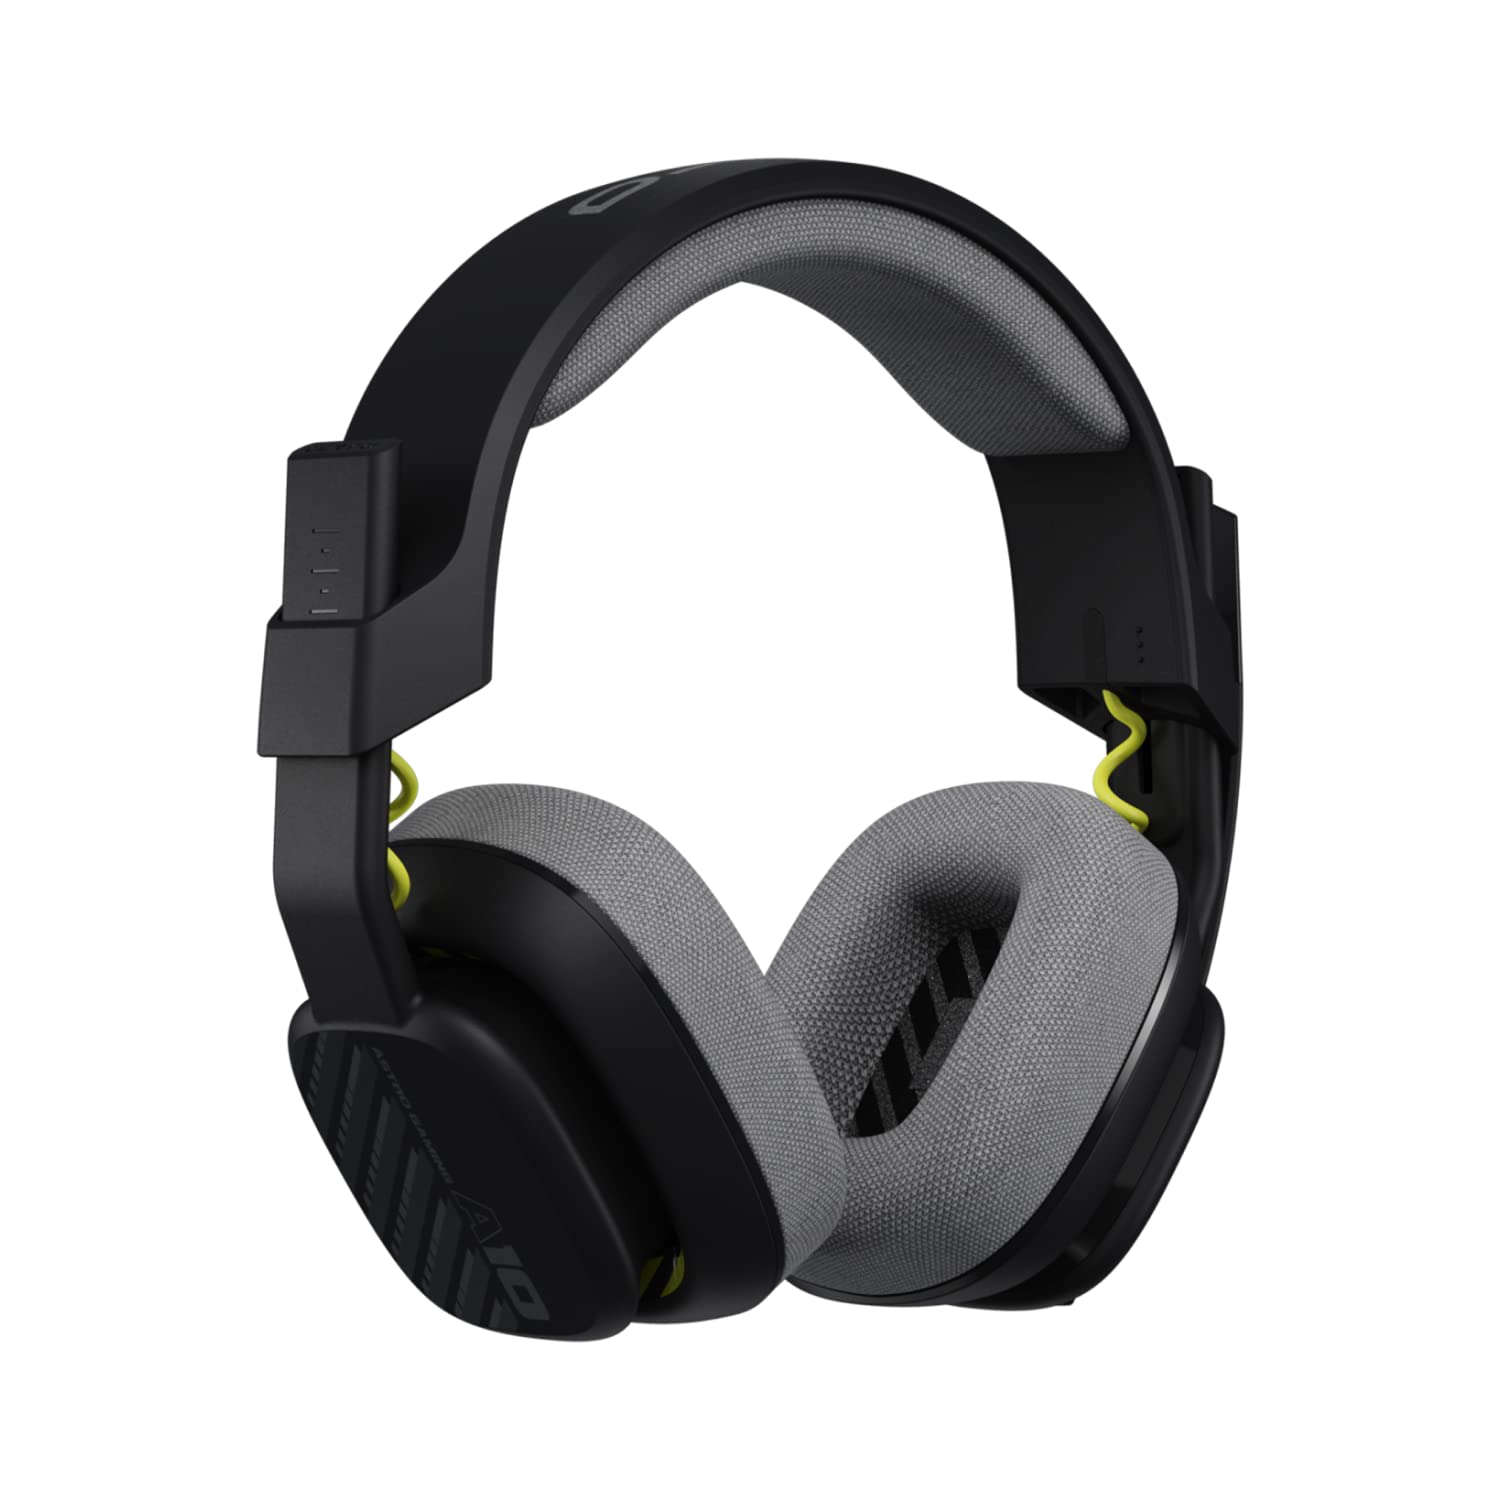 Astro A10 Gen 2 Wired Stereo Over-the-Ear Gaming Headset with Microphone - Black (Pre-Owned)